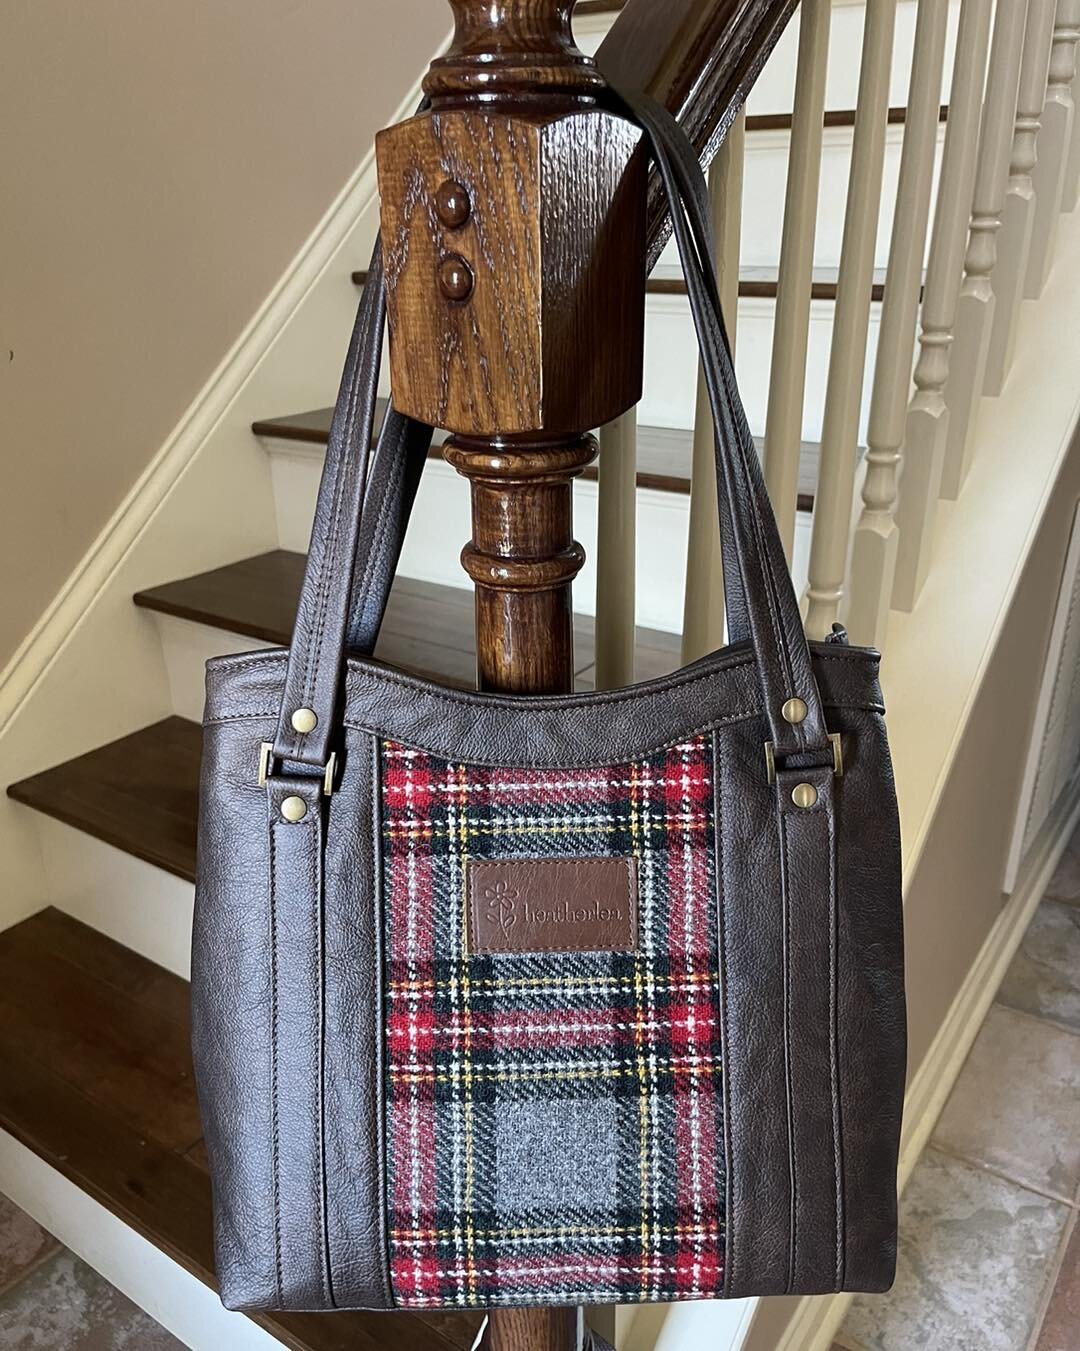 I finished this beauty last month but promised to wait and post it after the receiver&rsquo;s birthday. I used a pebbled brown leather and a handwoven inset of Harris Tweed wool from Scotland. Turned out great! So classy!